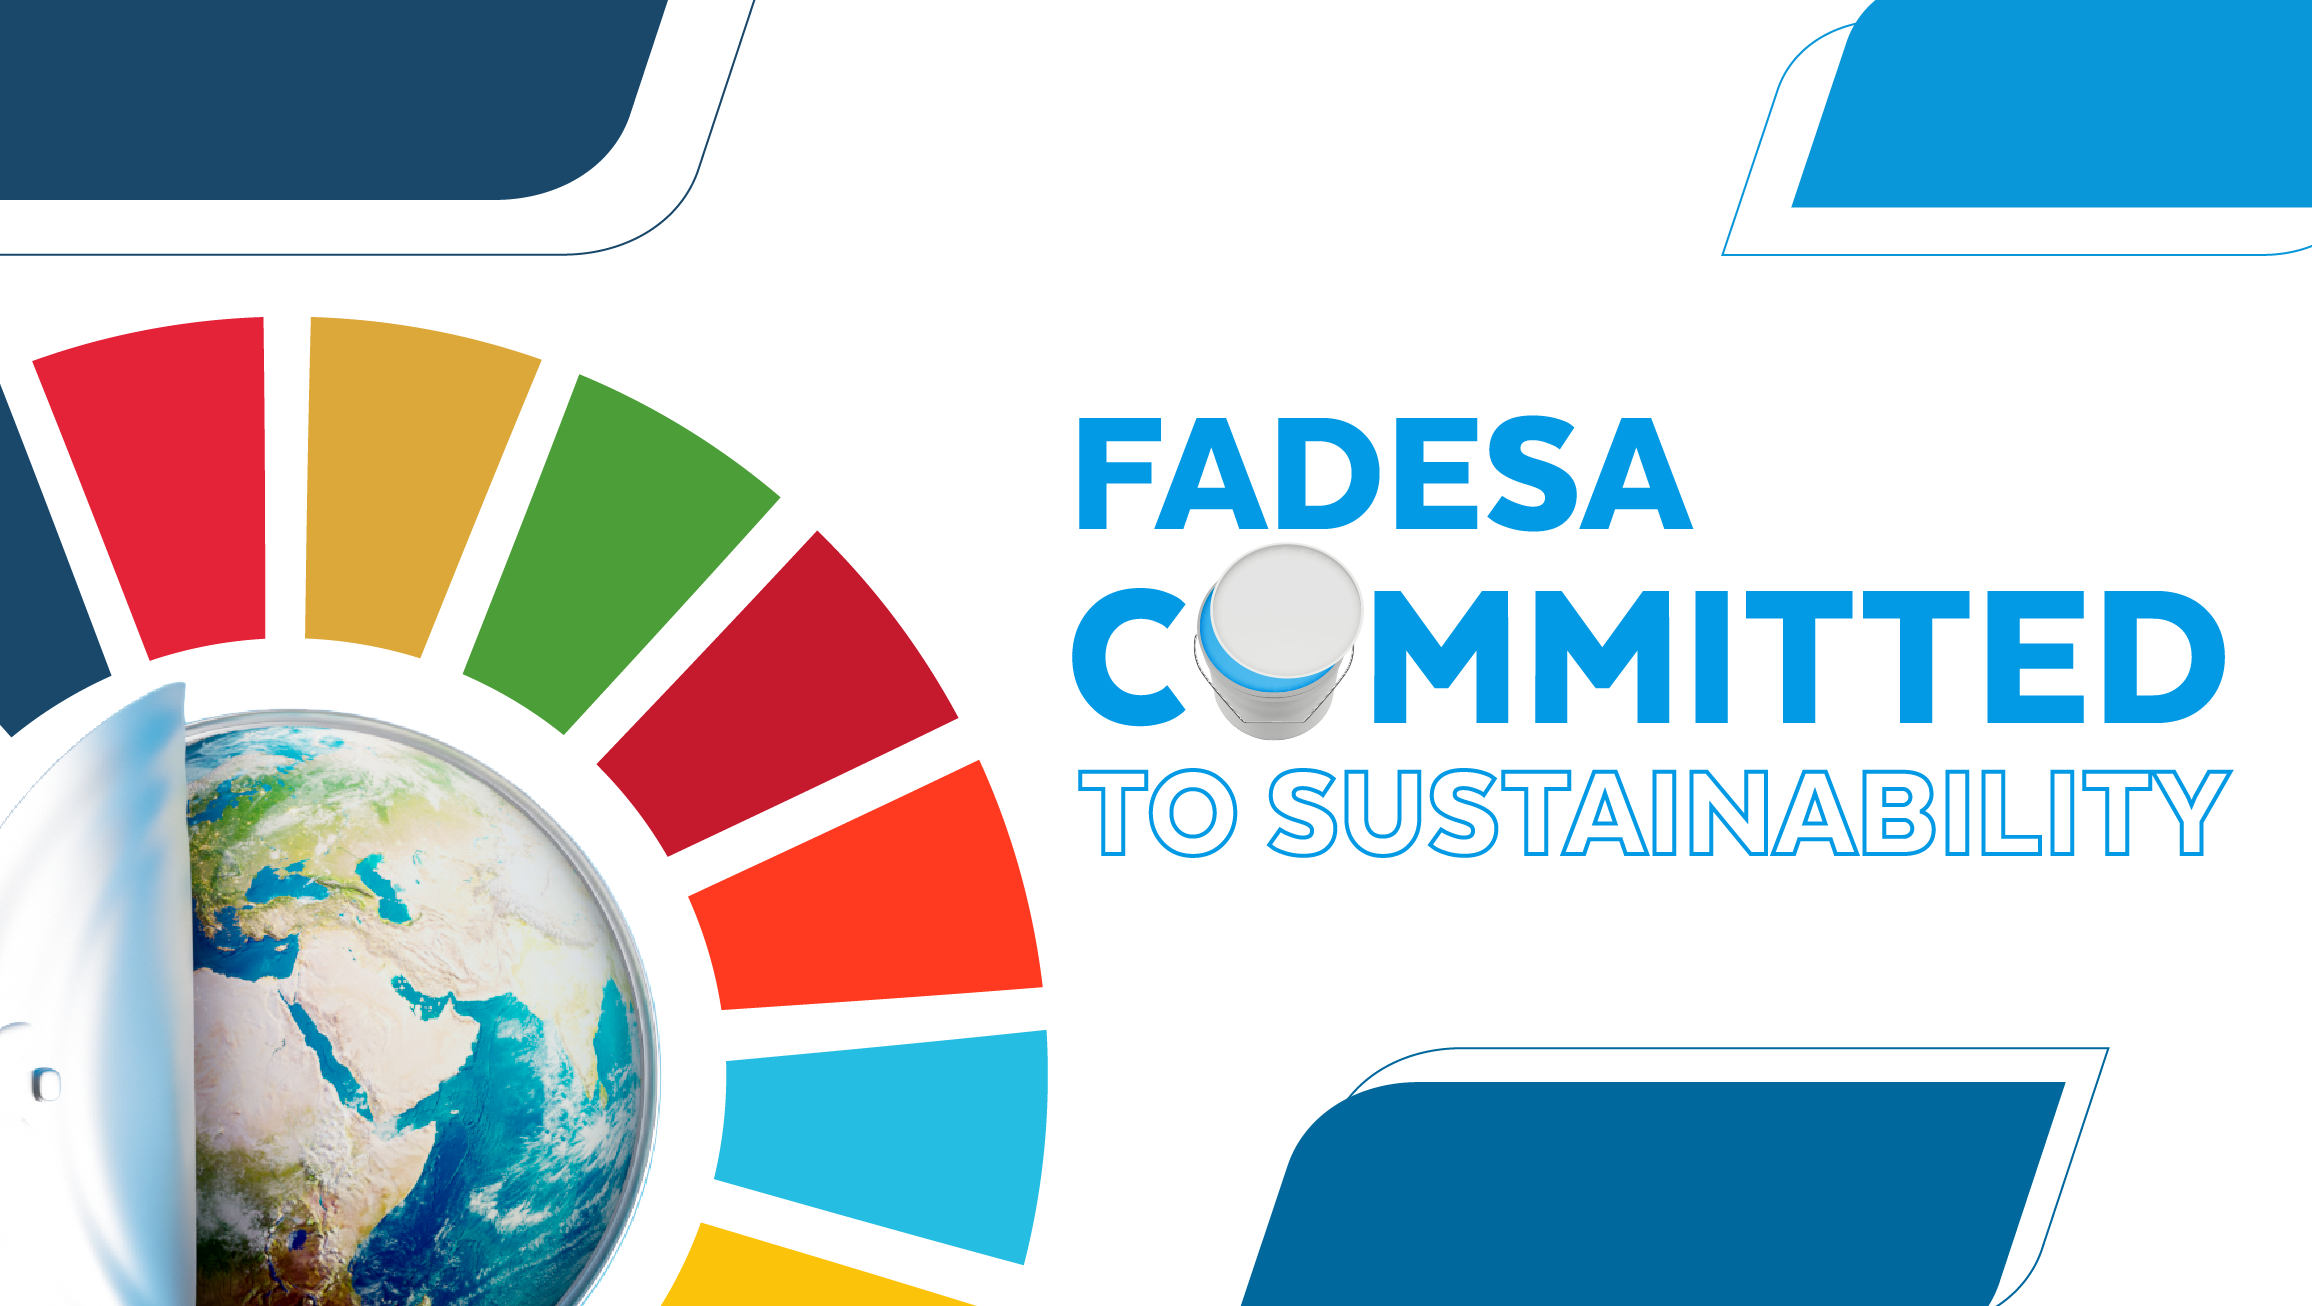 Fadesa commited to sustainibility